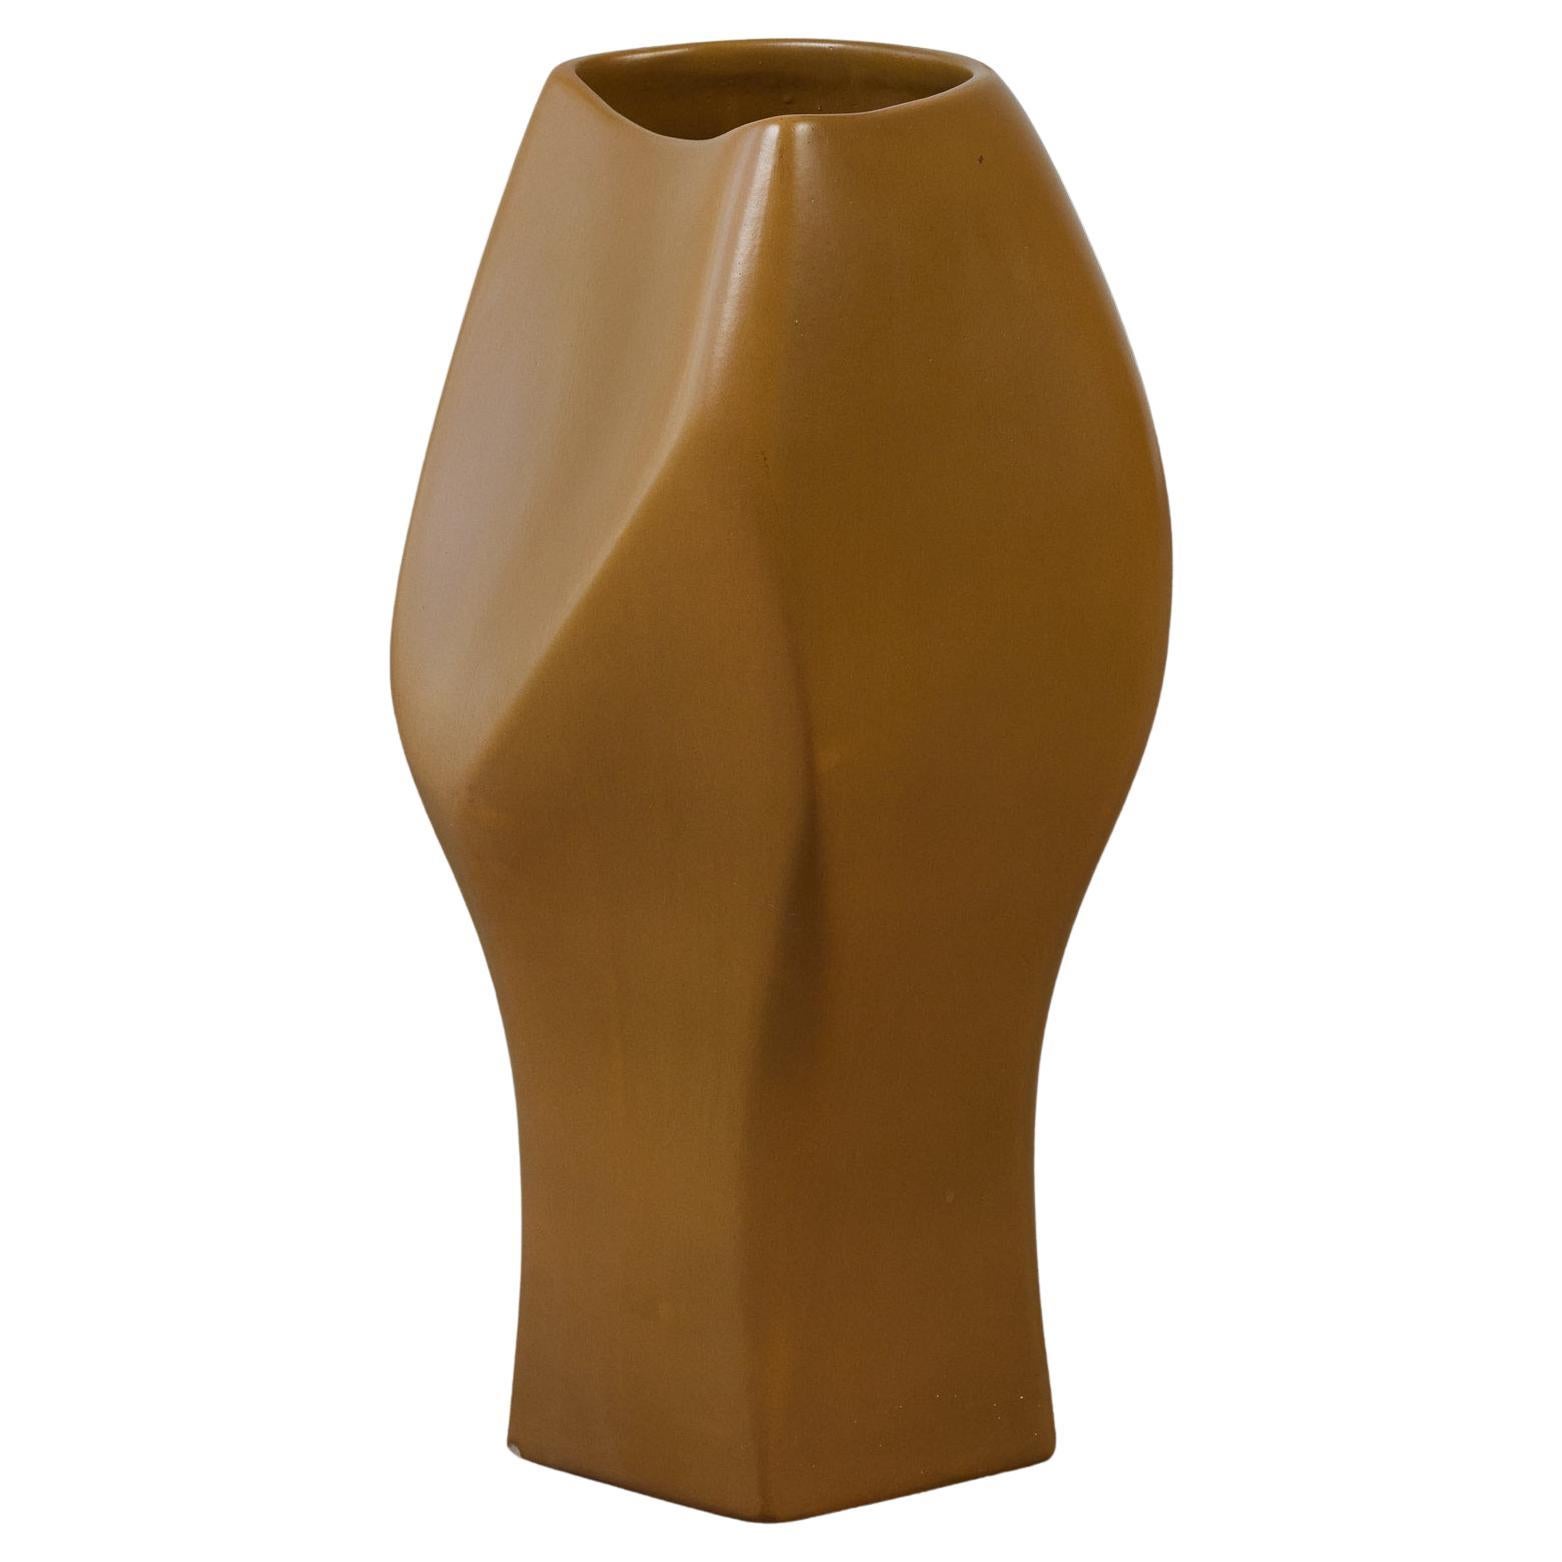 David Cressey Sculptural Planter for Architectural Pottery